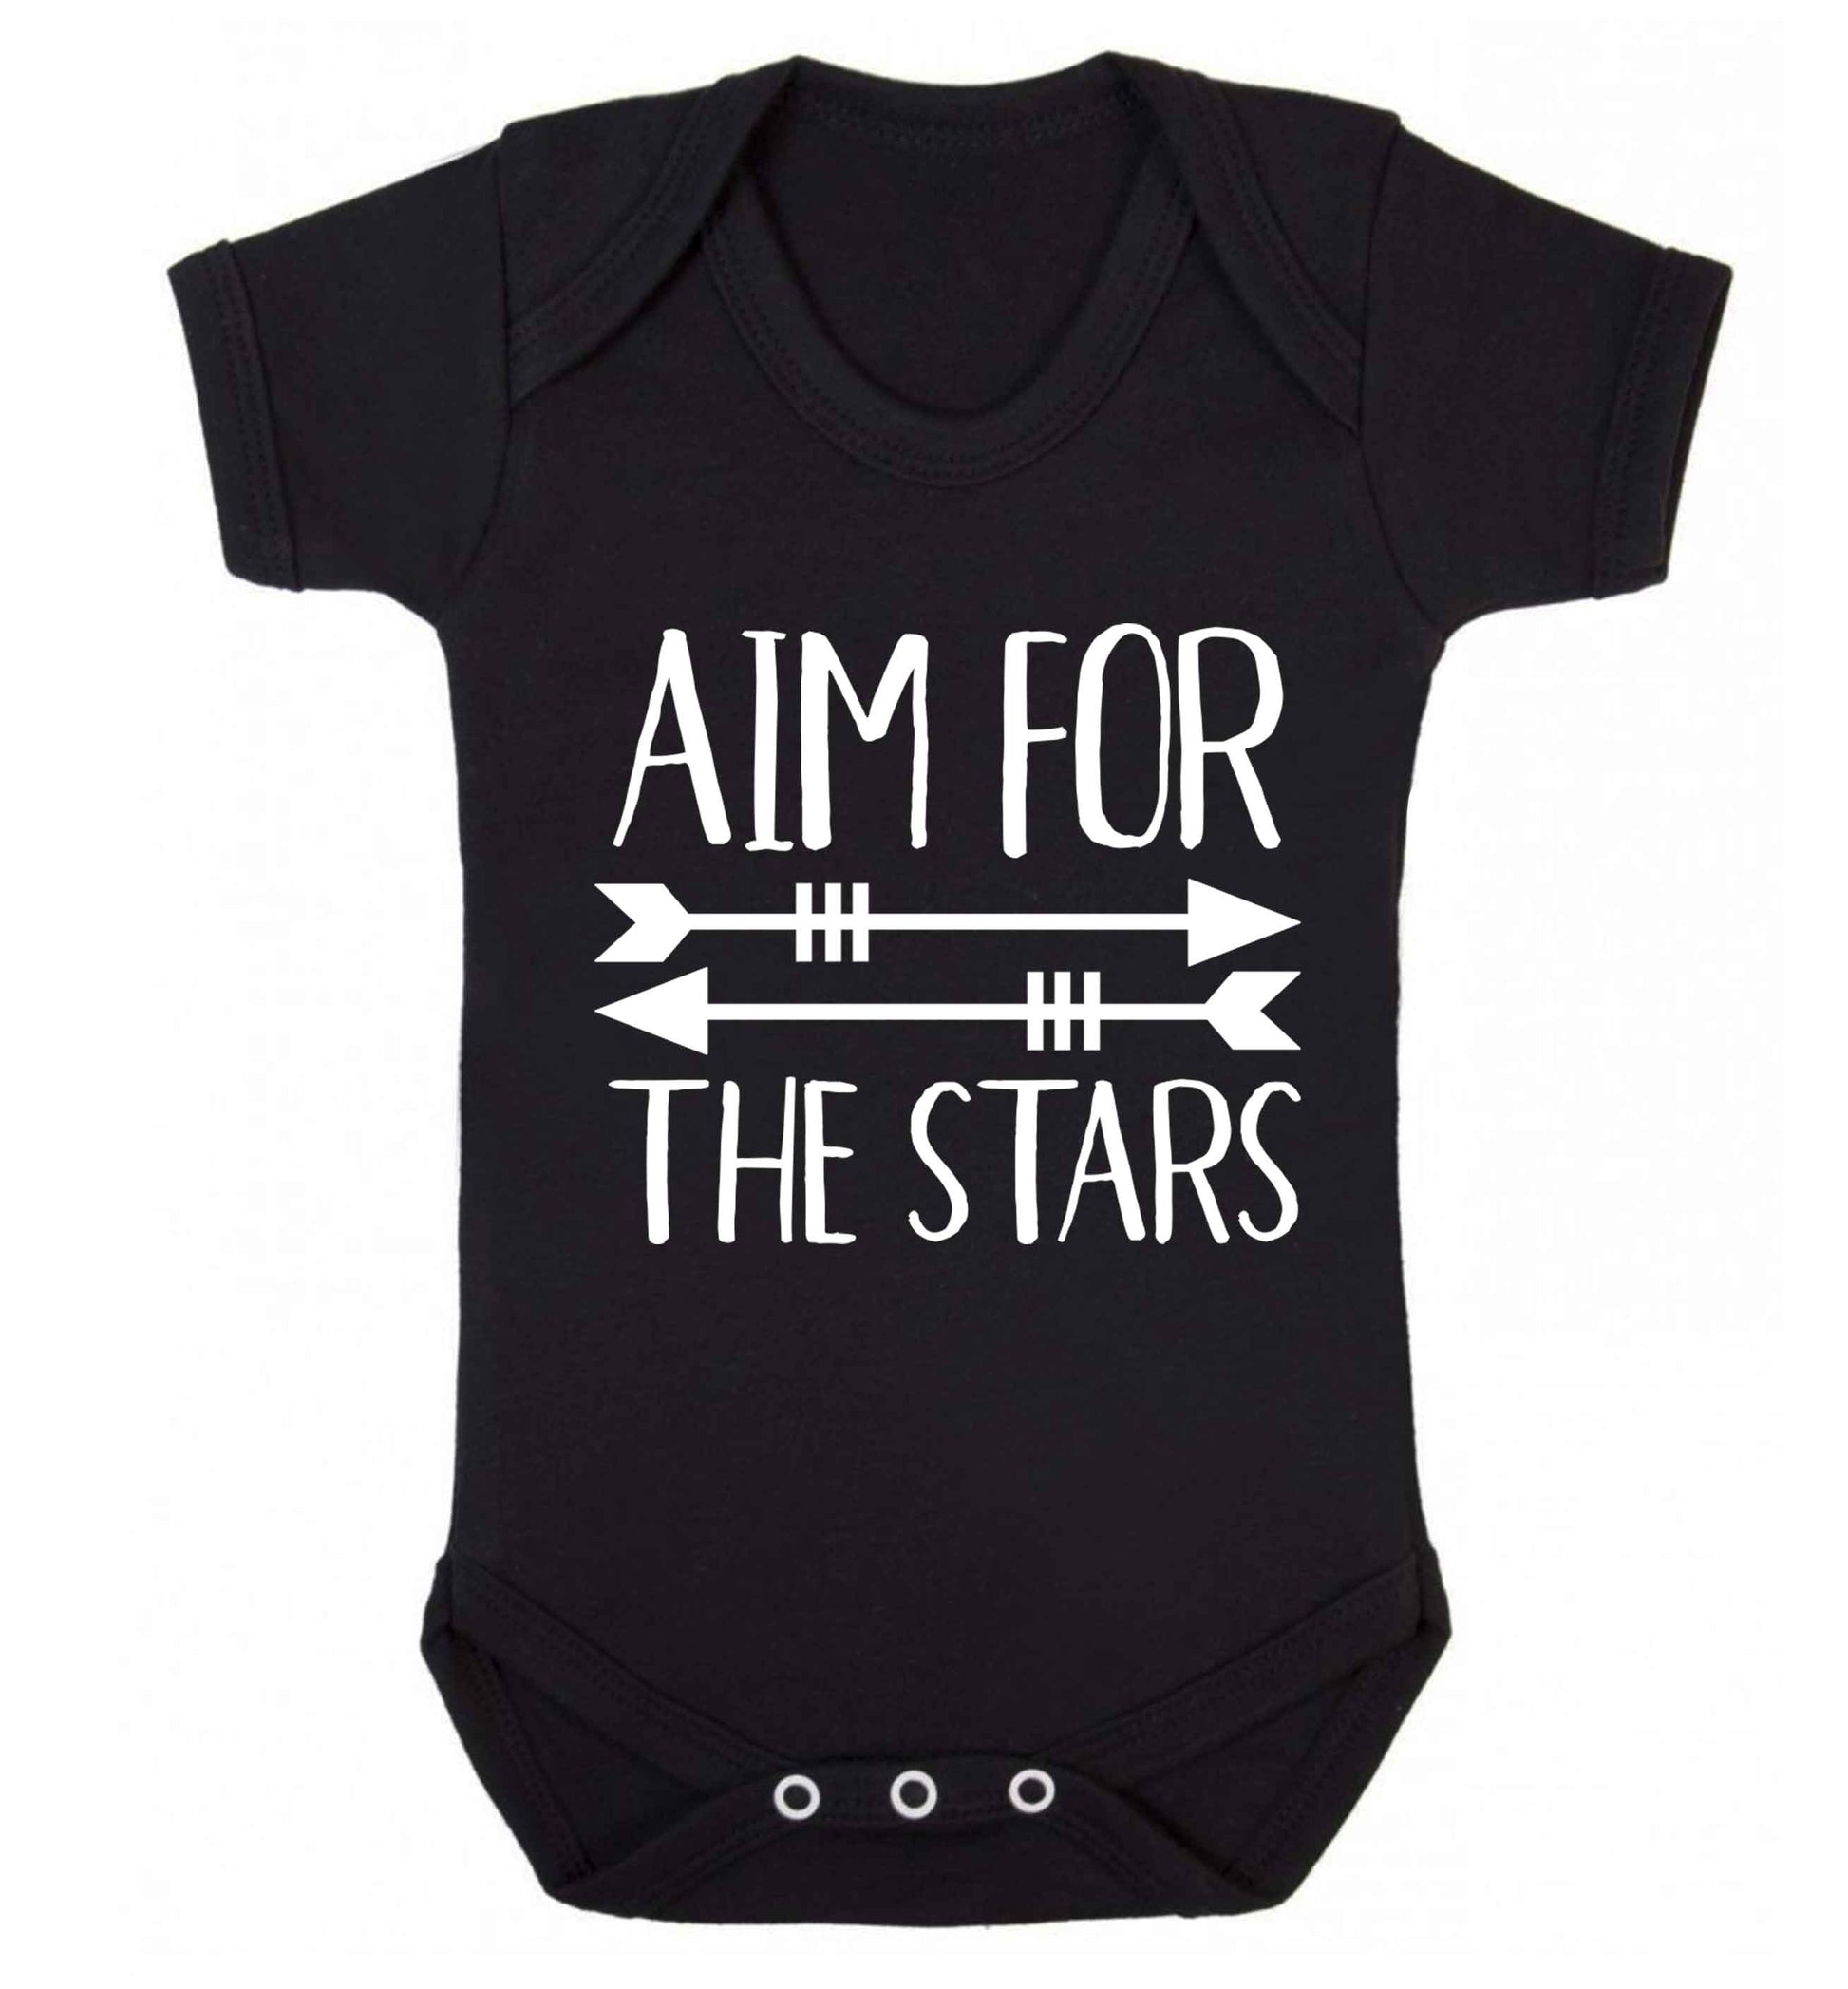 Aim for the stars Baby Vest black 18-24 months